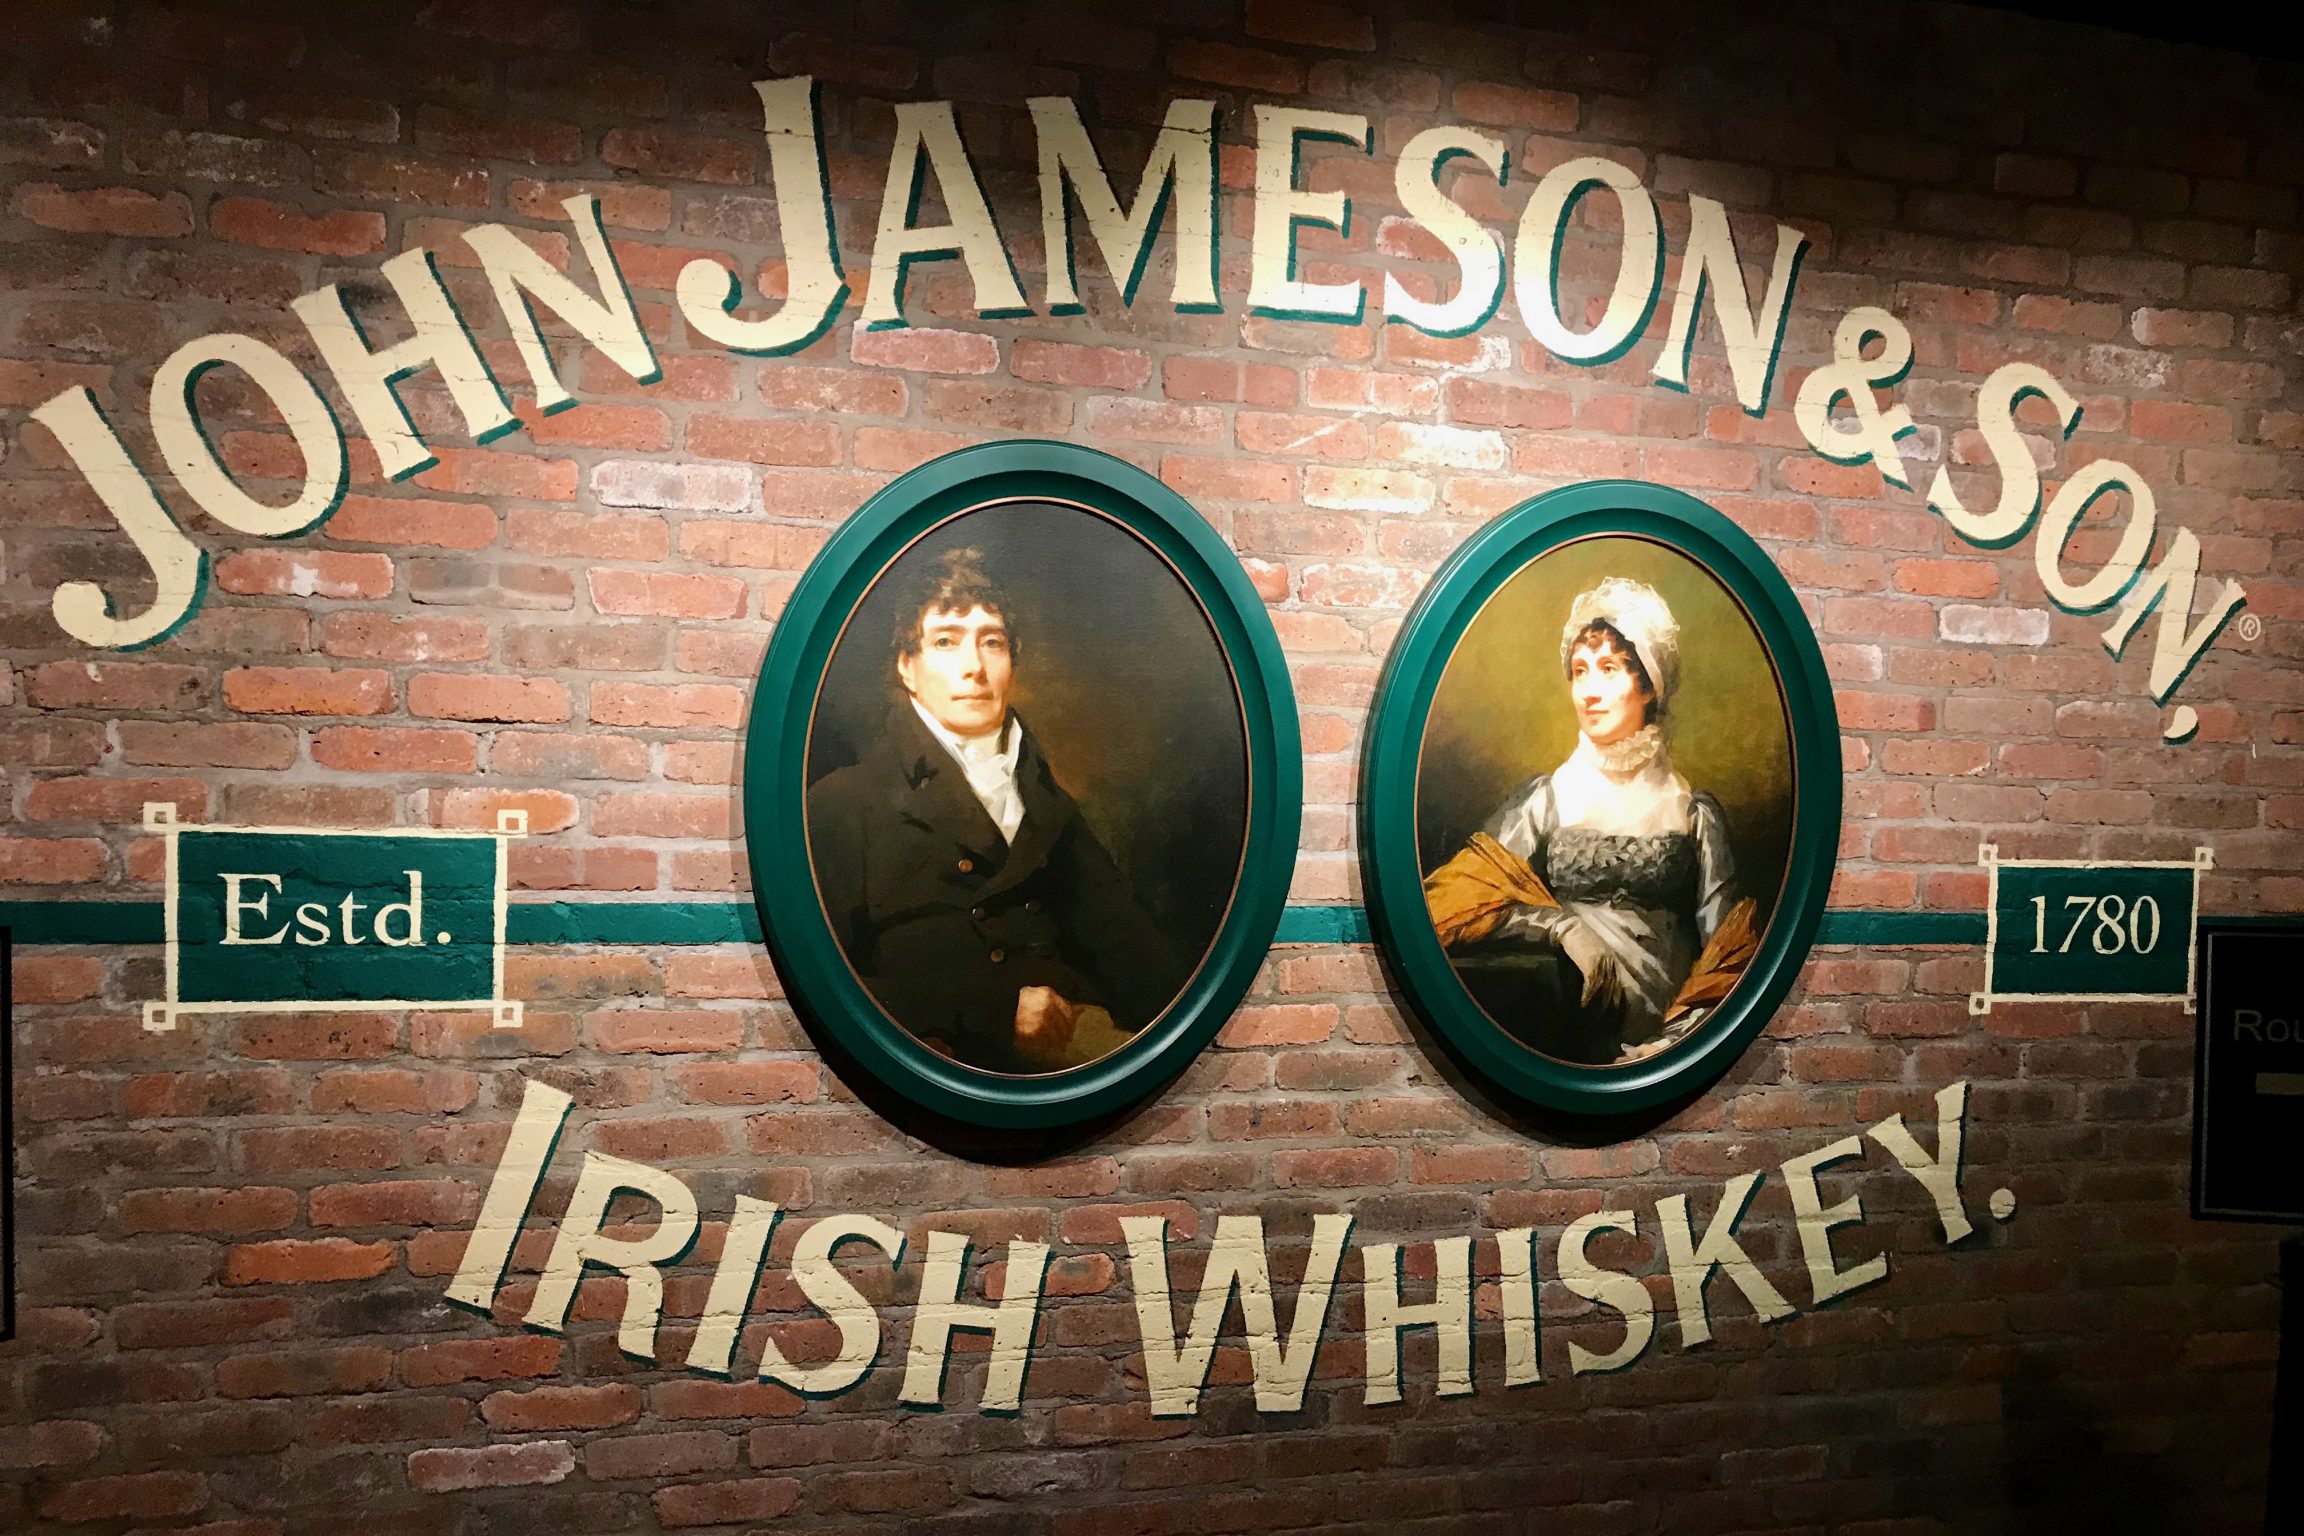 Jameson distillery tour and whiskey tasting experience in Dublin